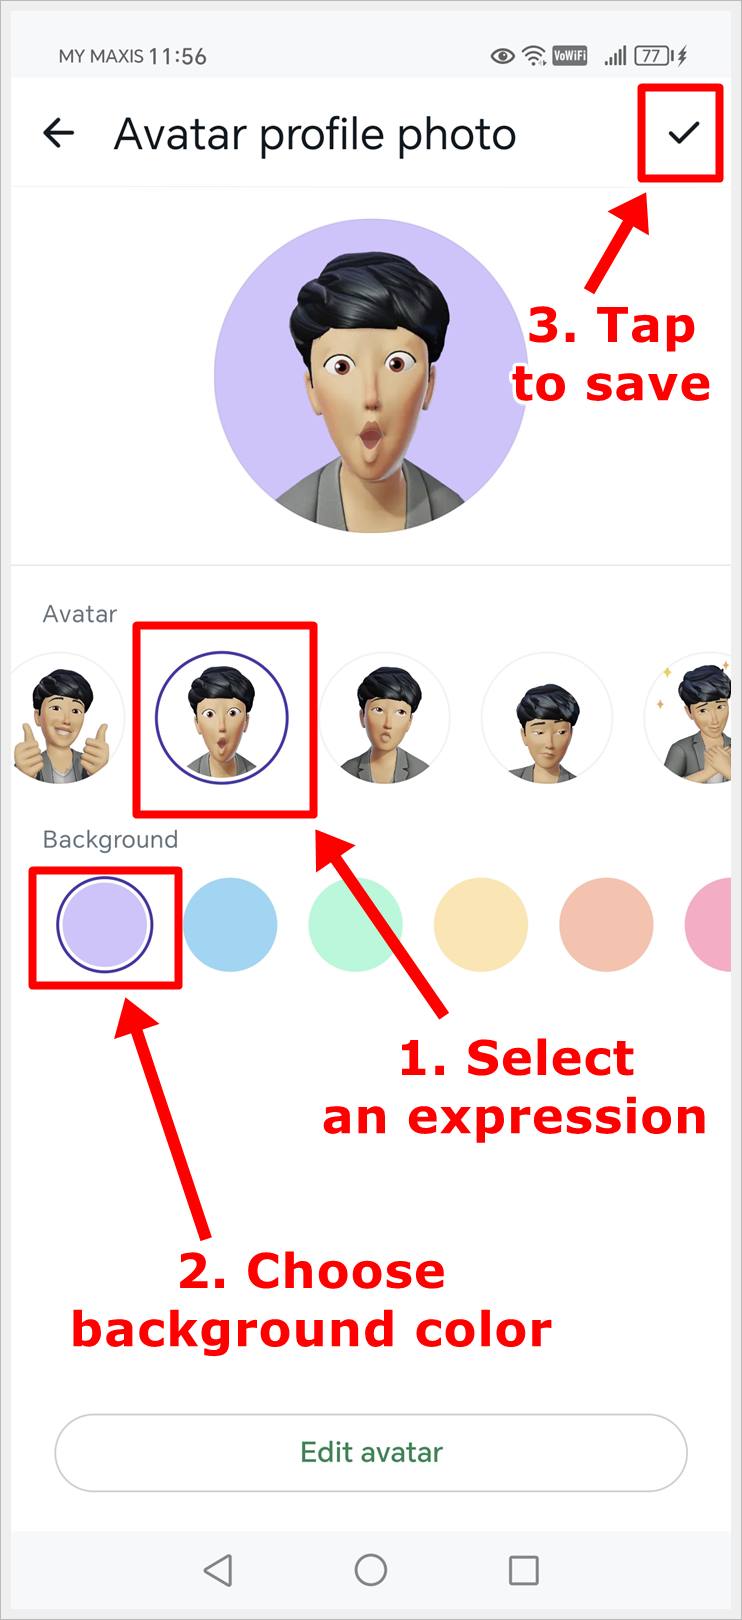 Image shows steps to select an avatar expression, choose background color and finally save the WhatsApp avatar profile photo.